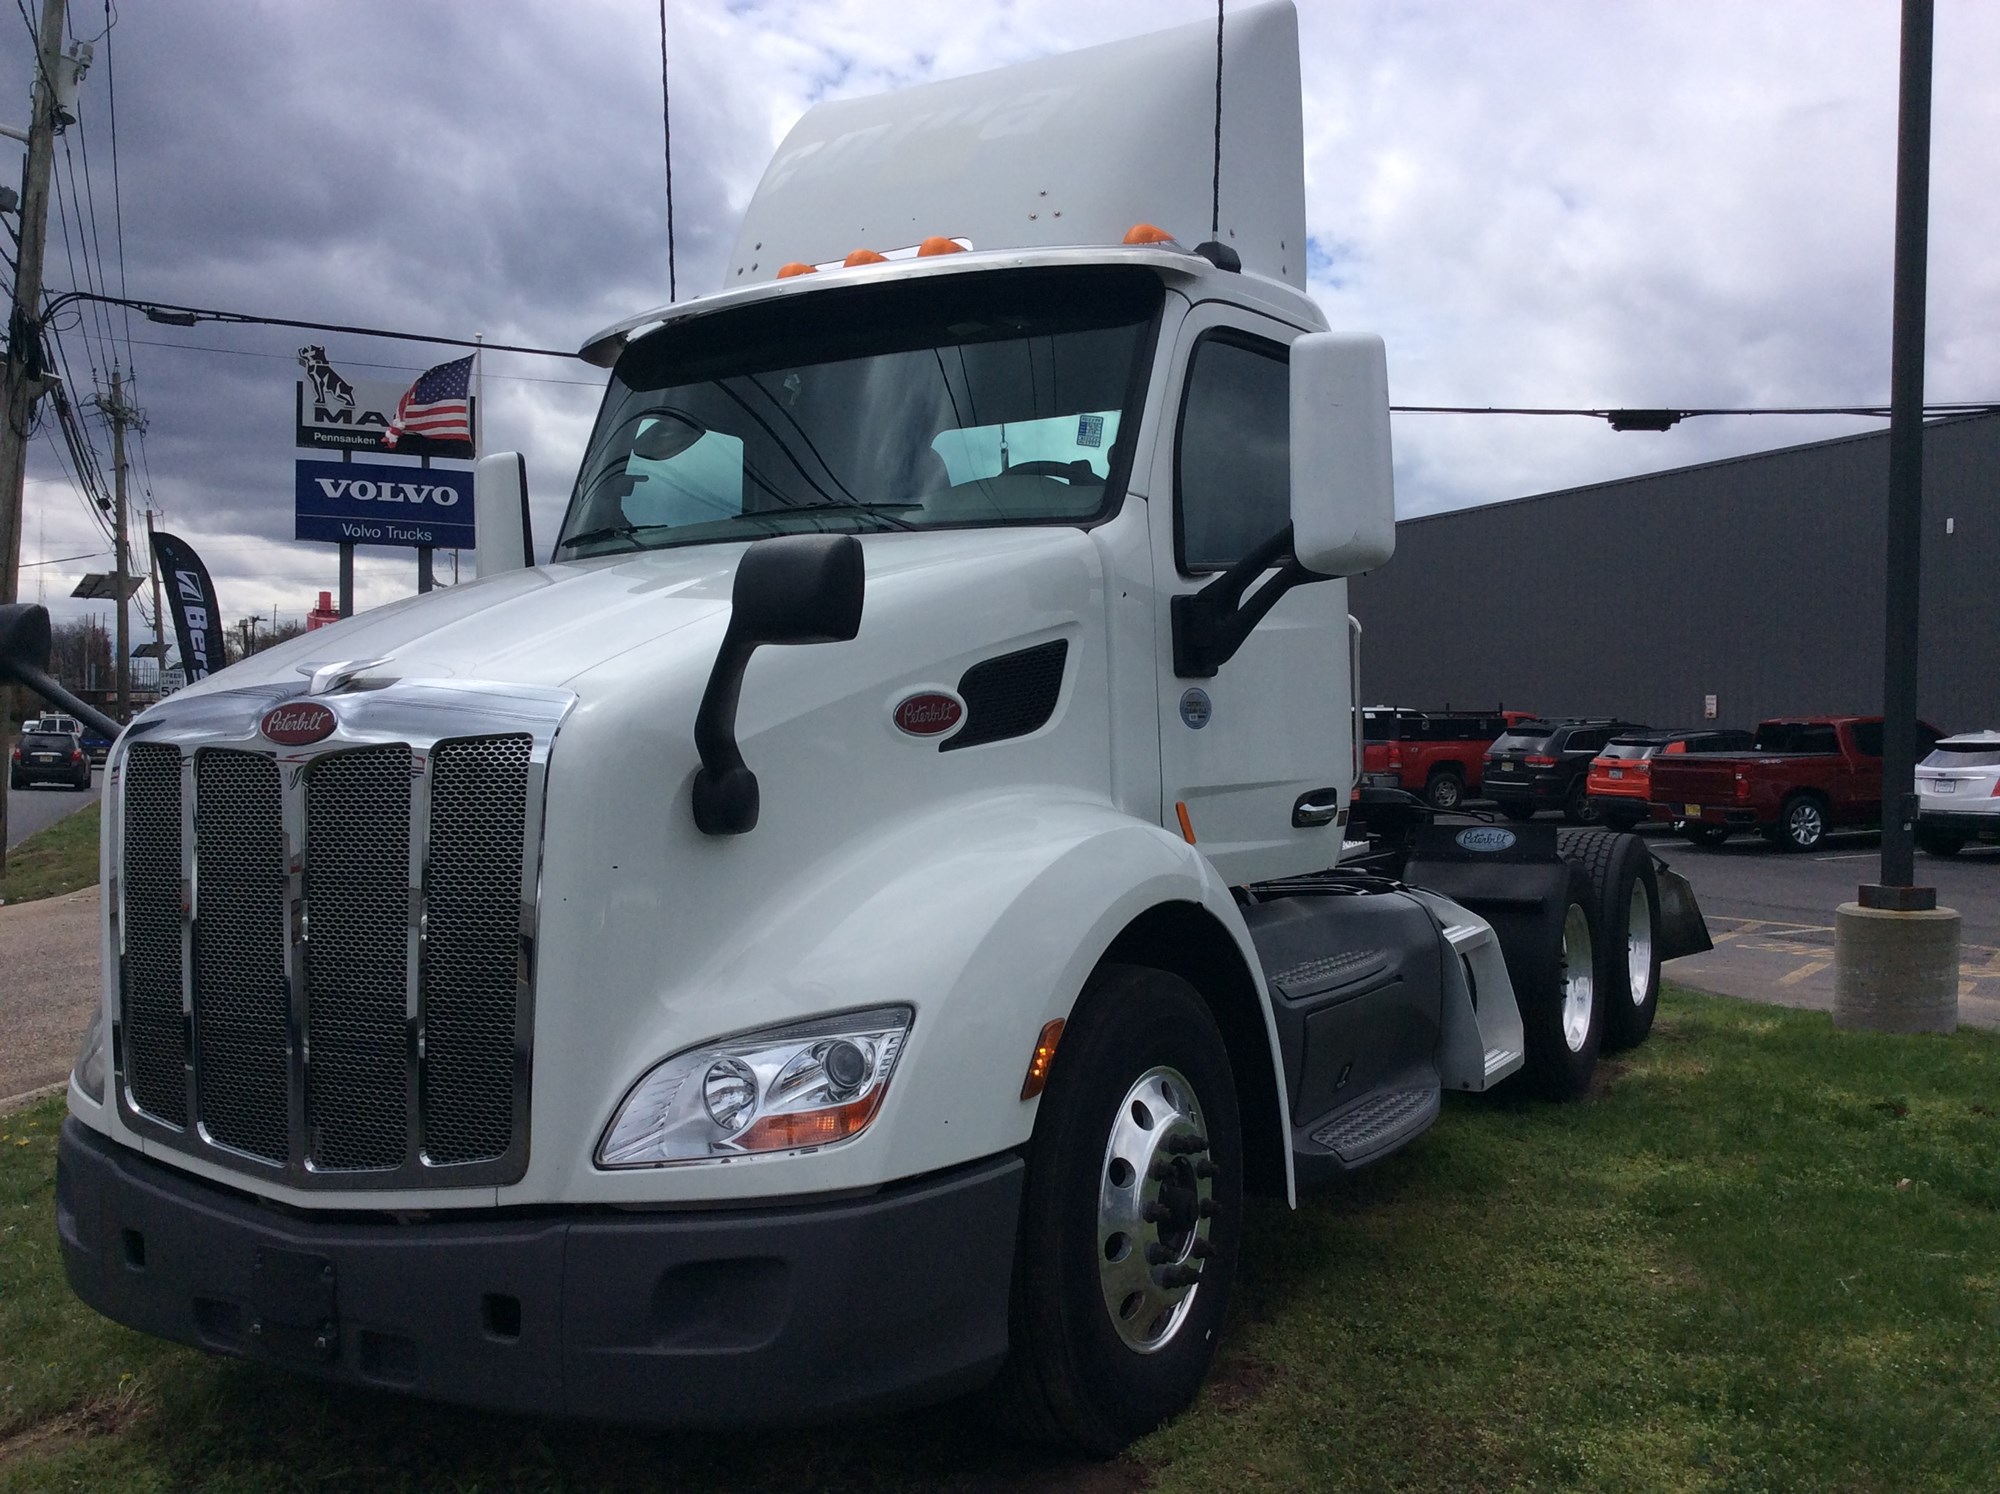 Used Truck Inventory - 1000878 01 - 31